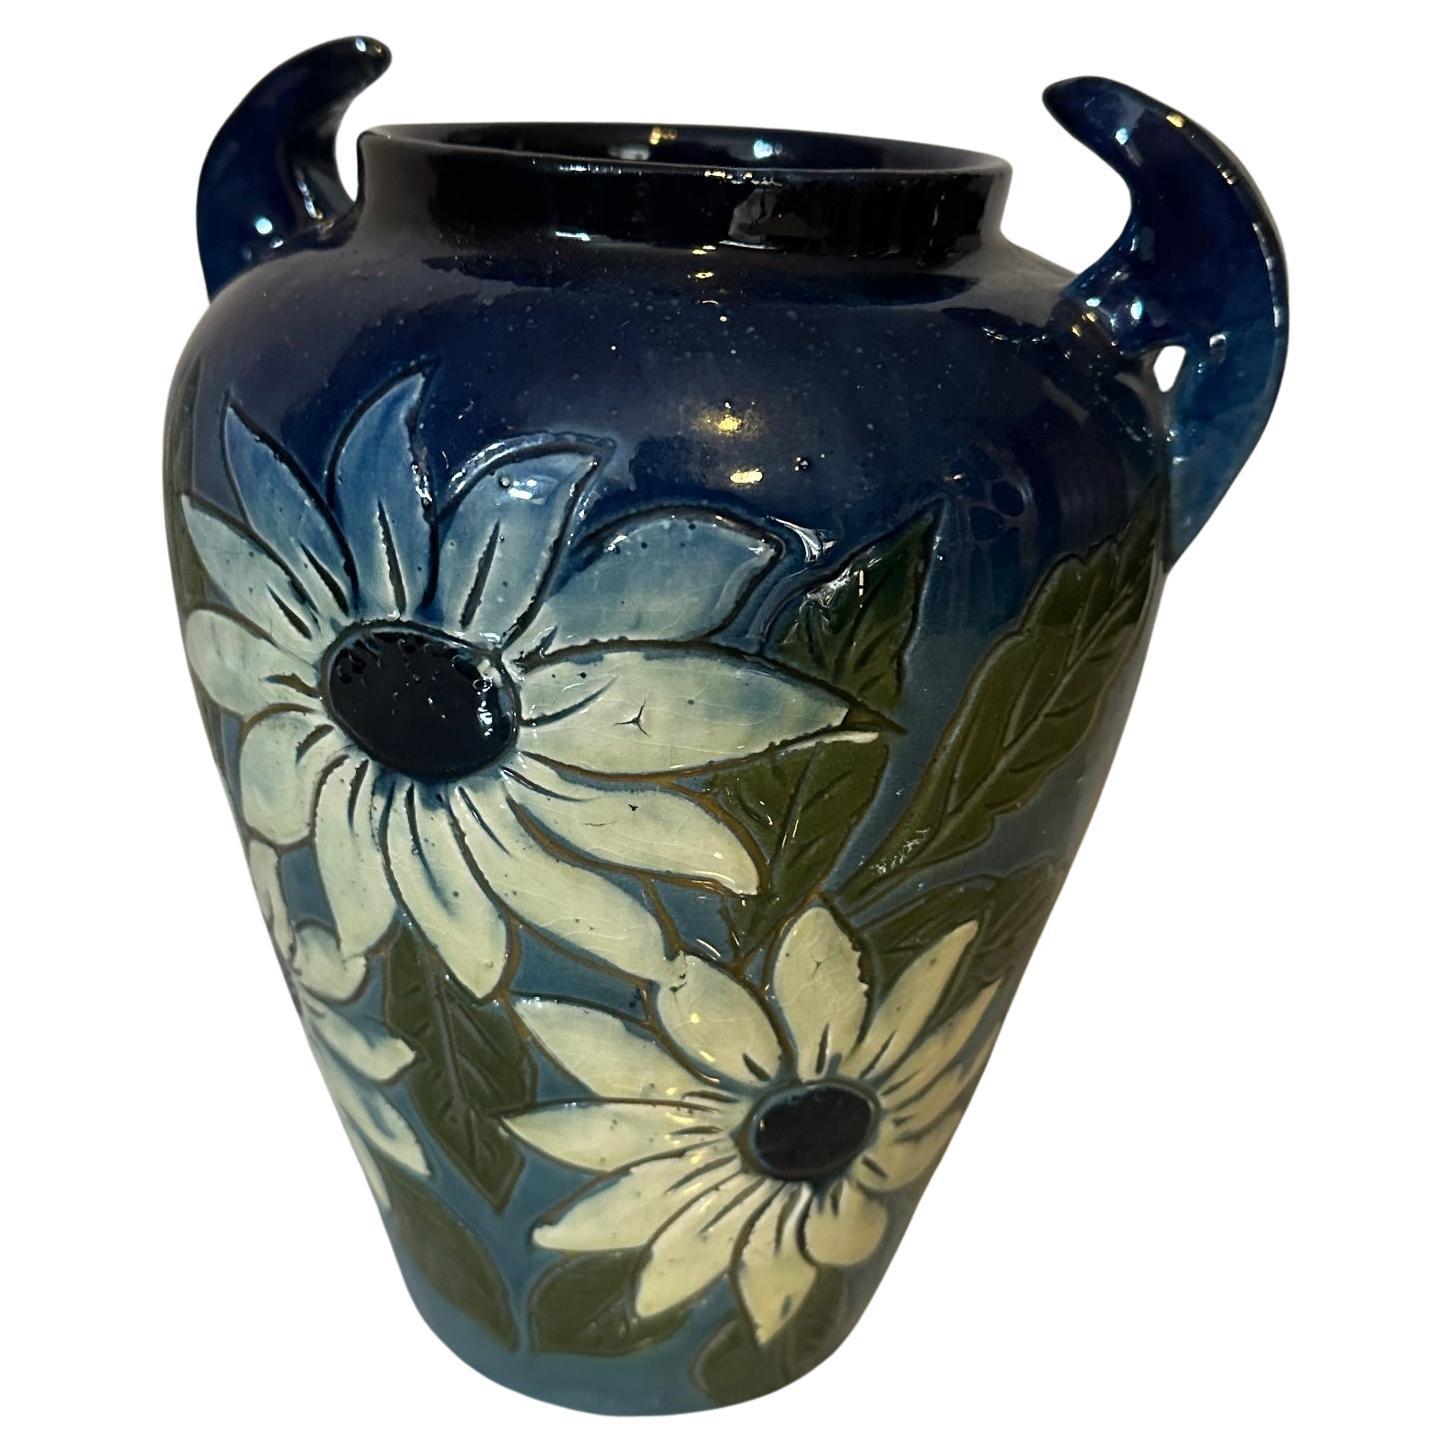 20th century French Painted Terracotta Fauquet Vase, 1940s